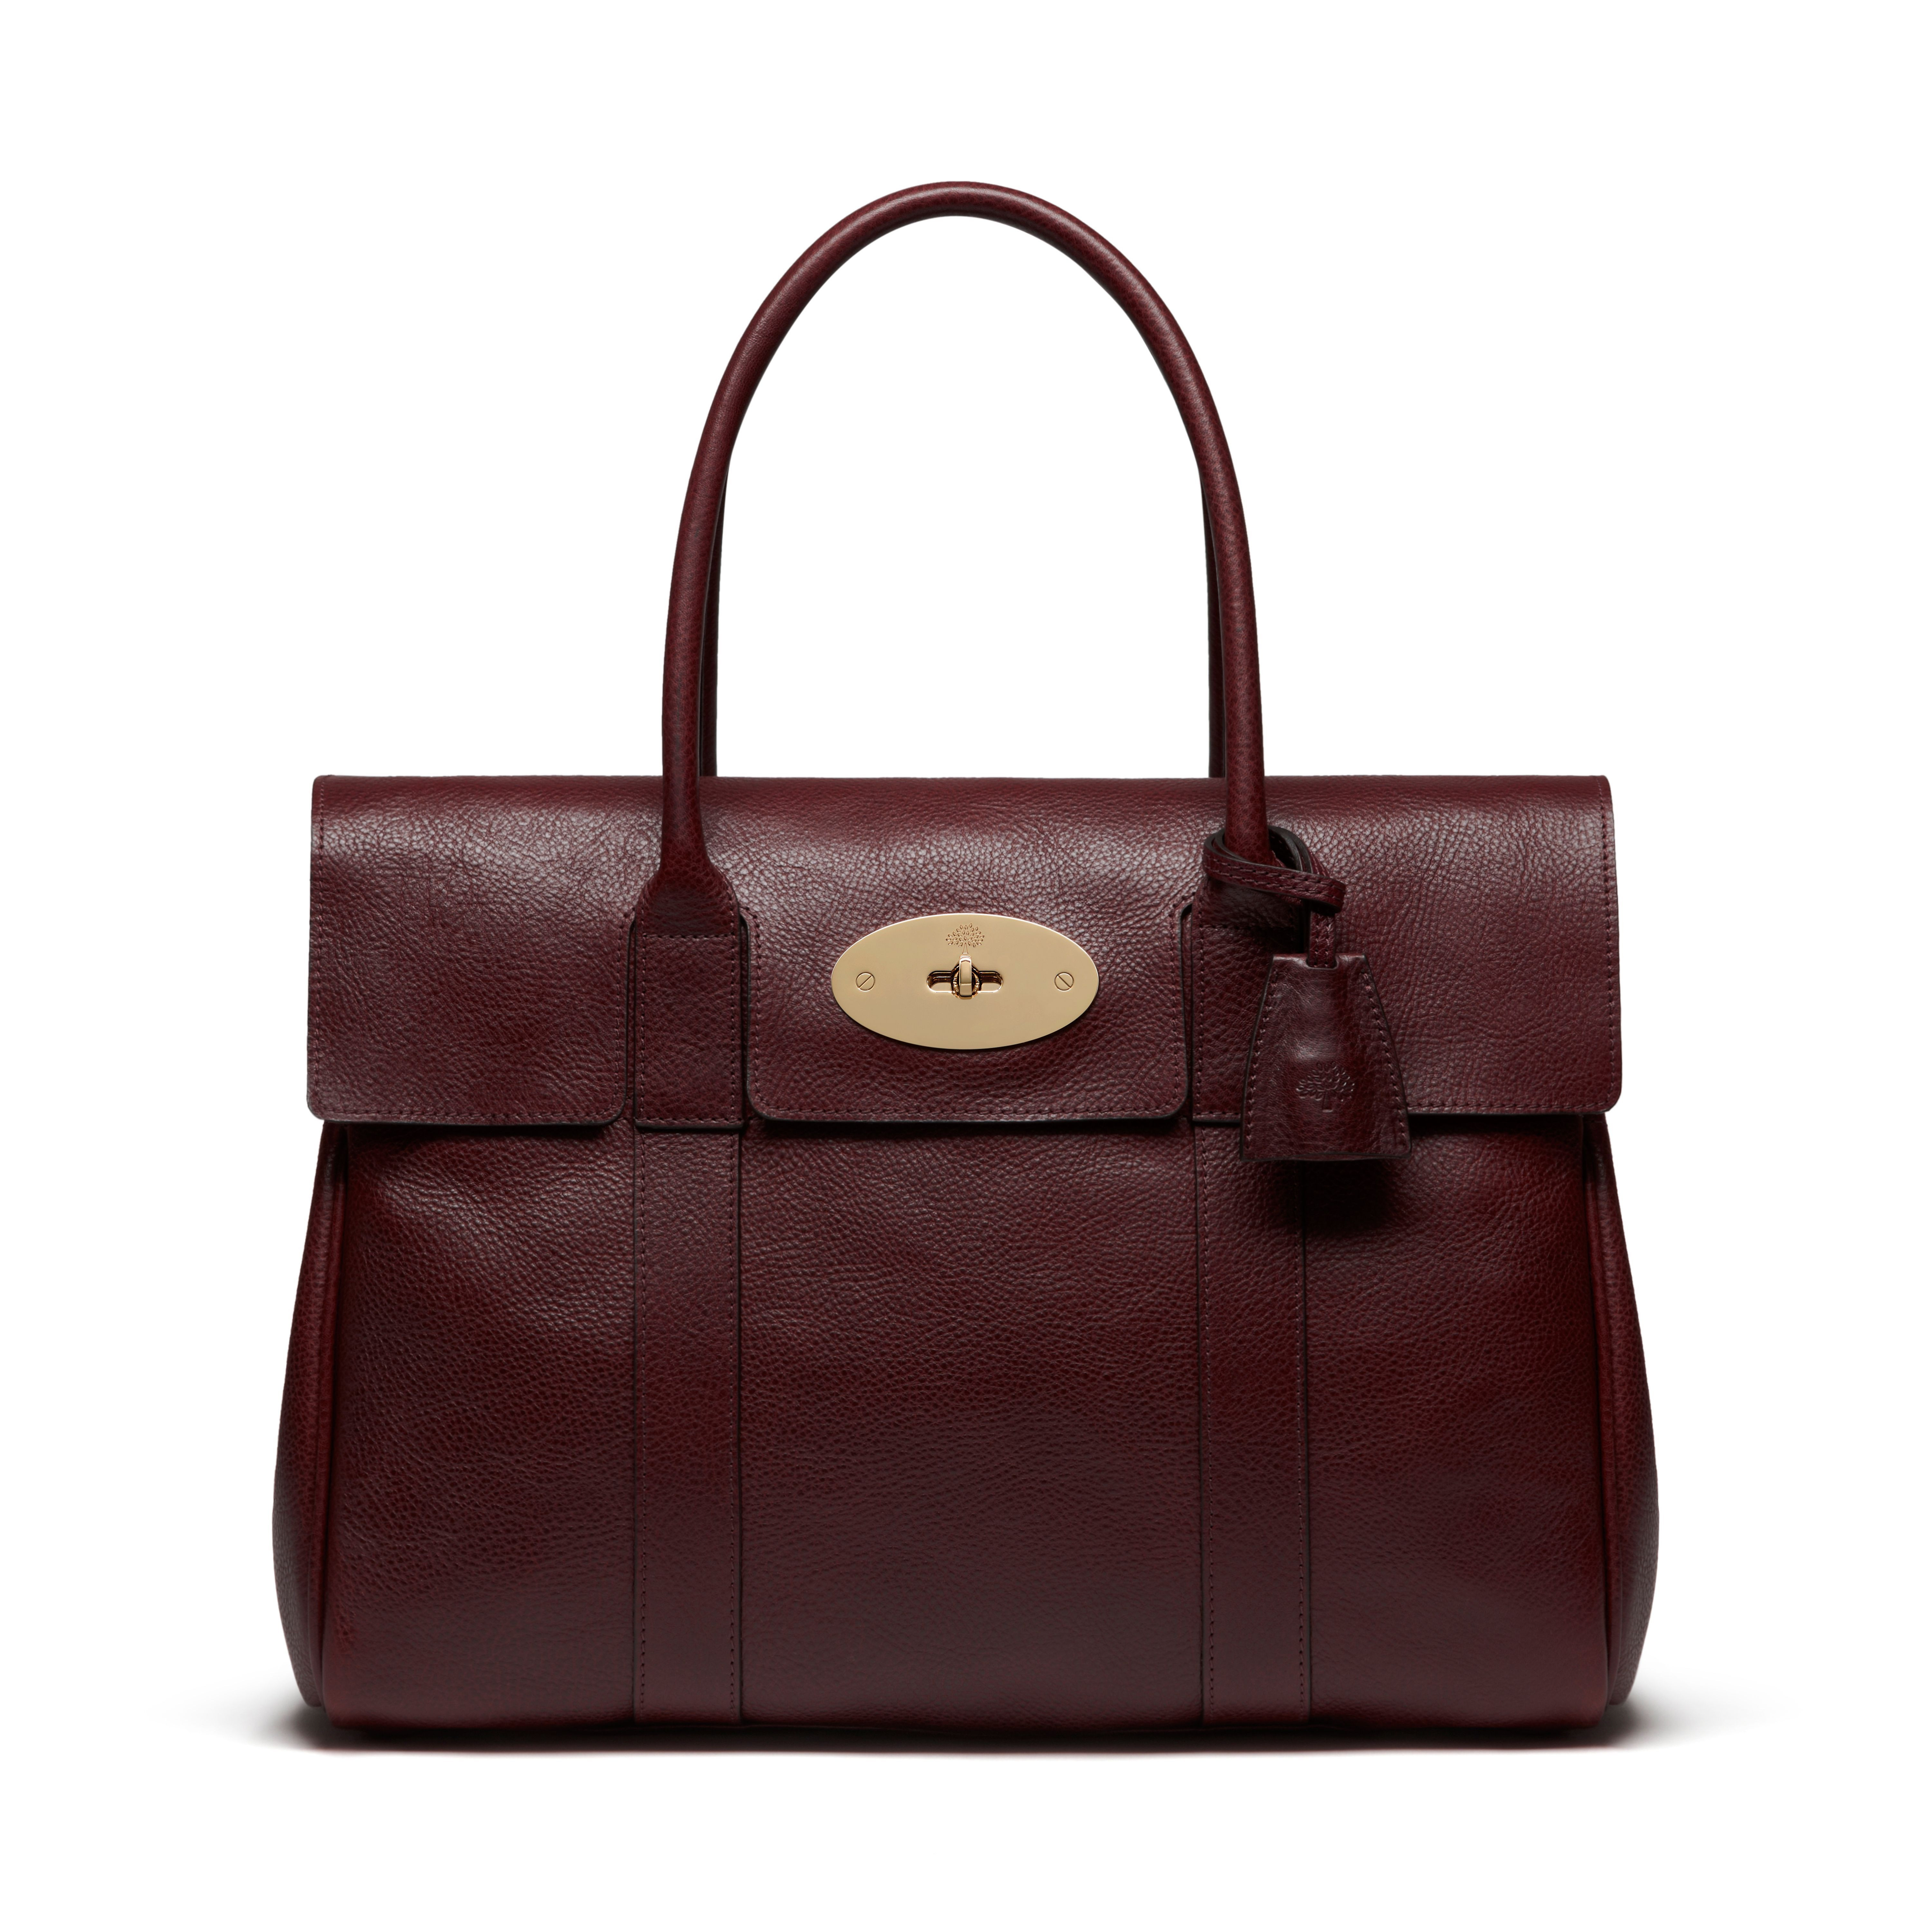 MULBERRY BAYSWATER TOTE - OXBLOOD - ONE SIZE